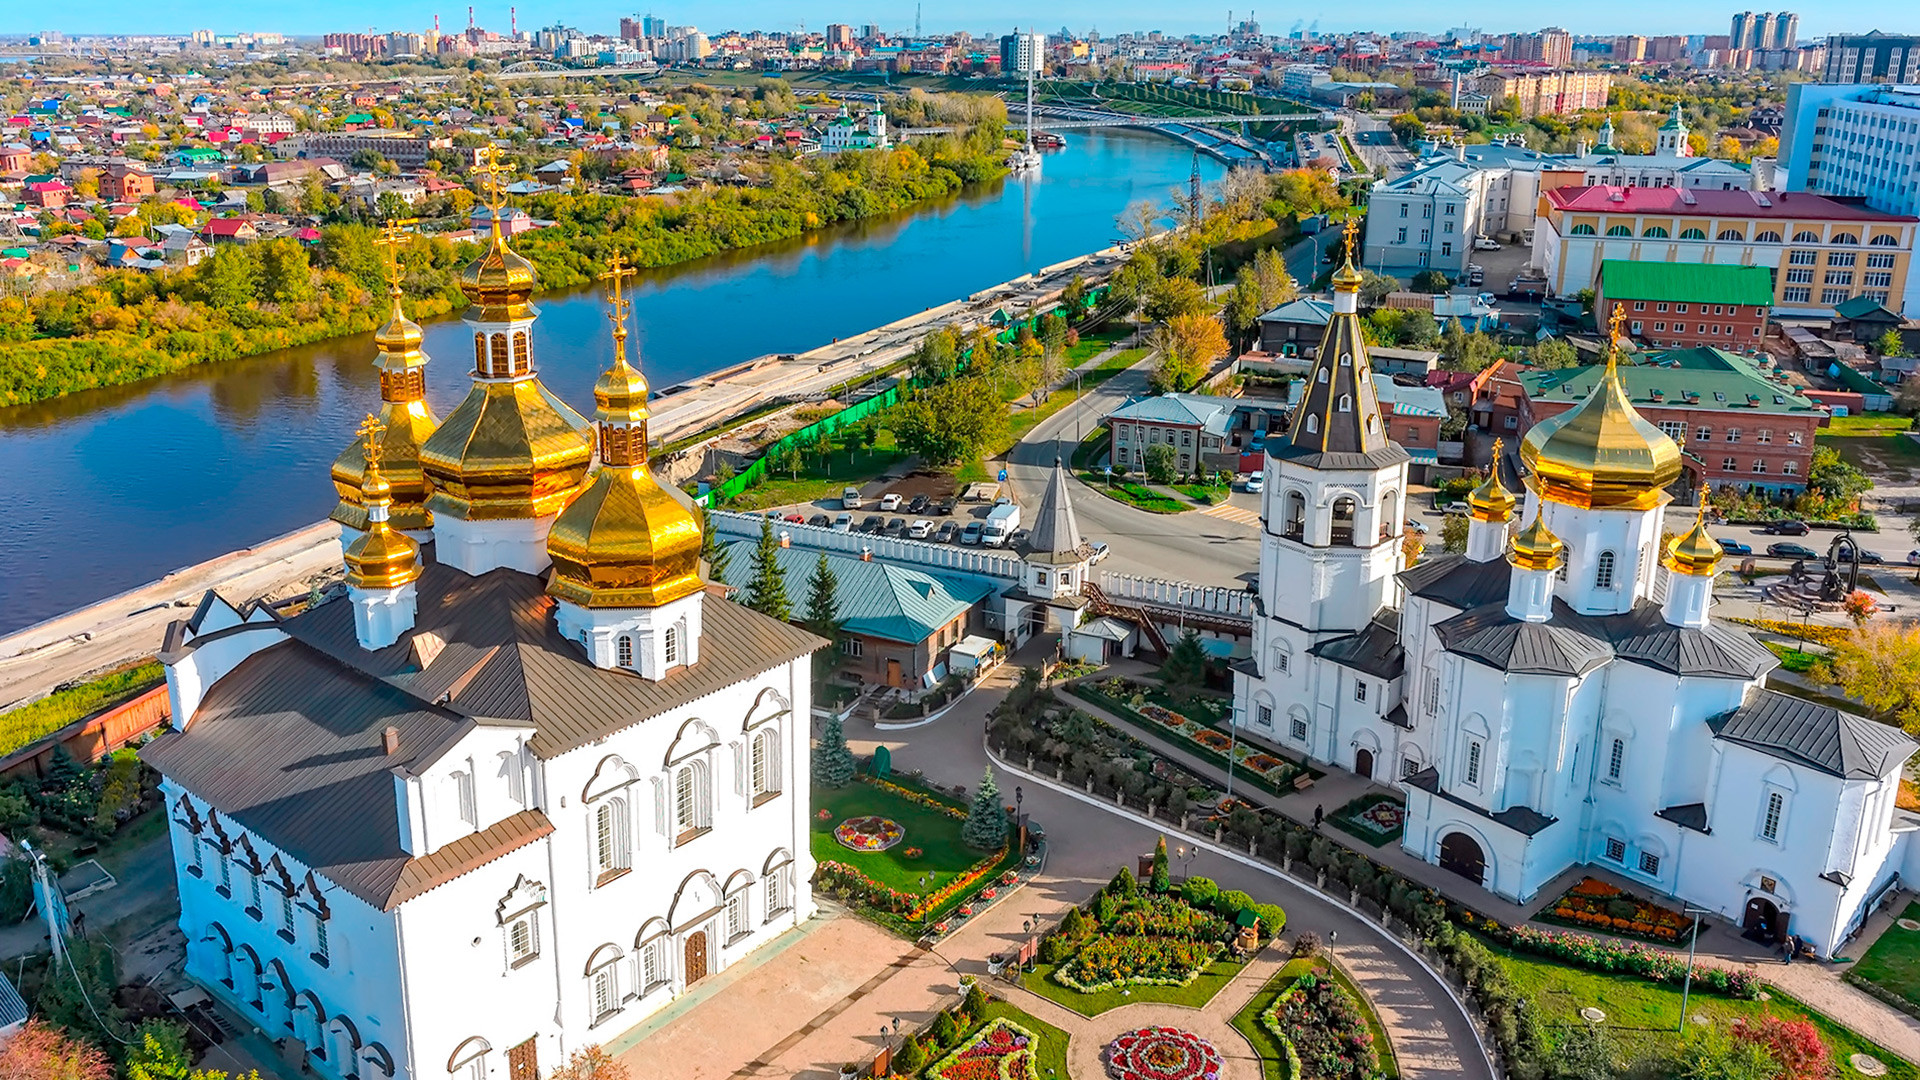 What Time Is It In Tyumen Russia : The views of Tyumen from the city's tallest building ... : • 8:00 am tyumen, russia time conversion to worldwide times